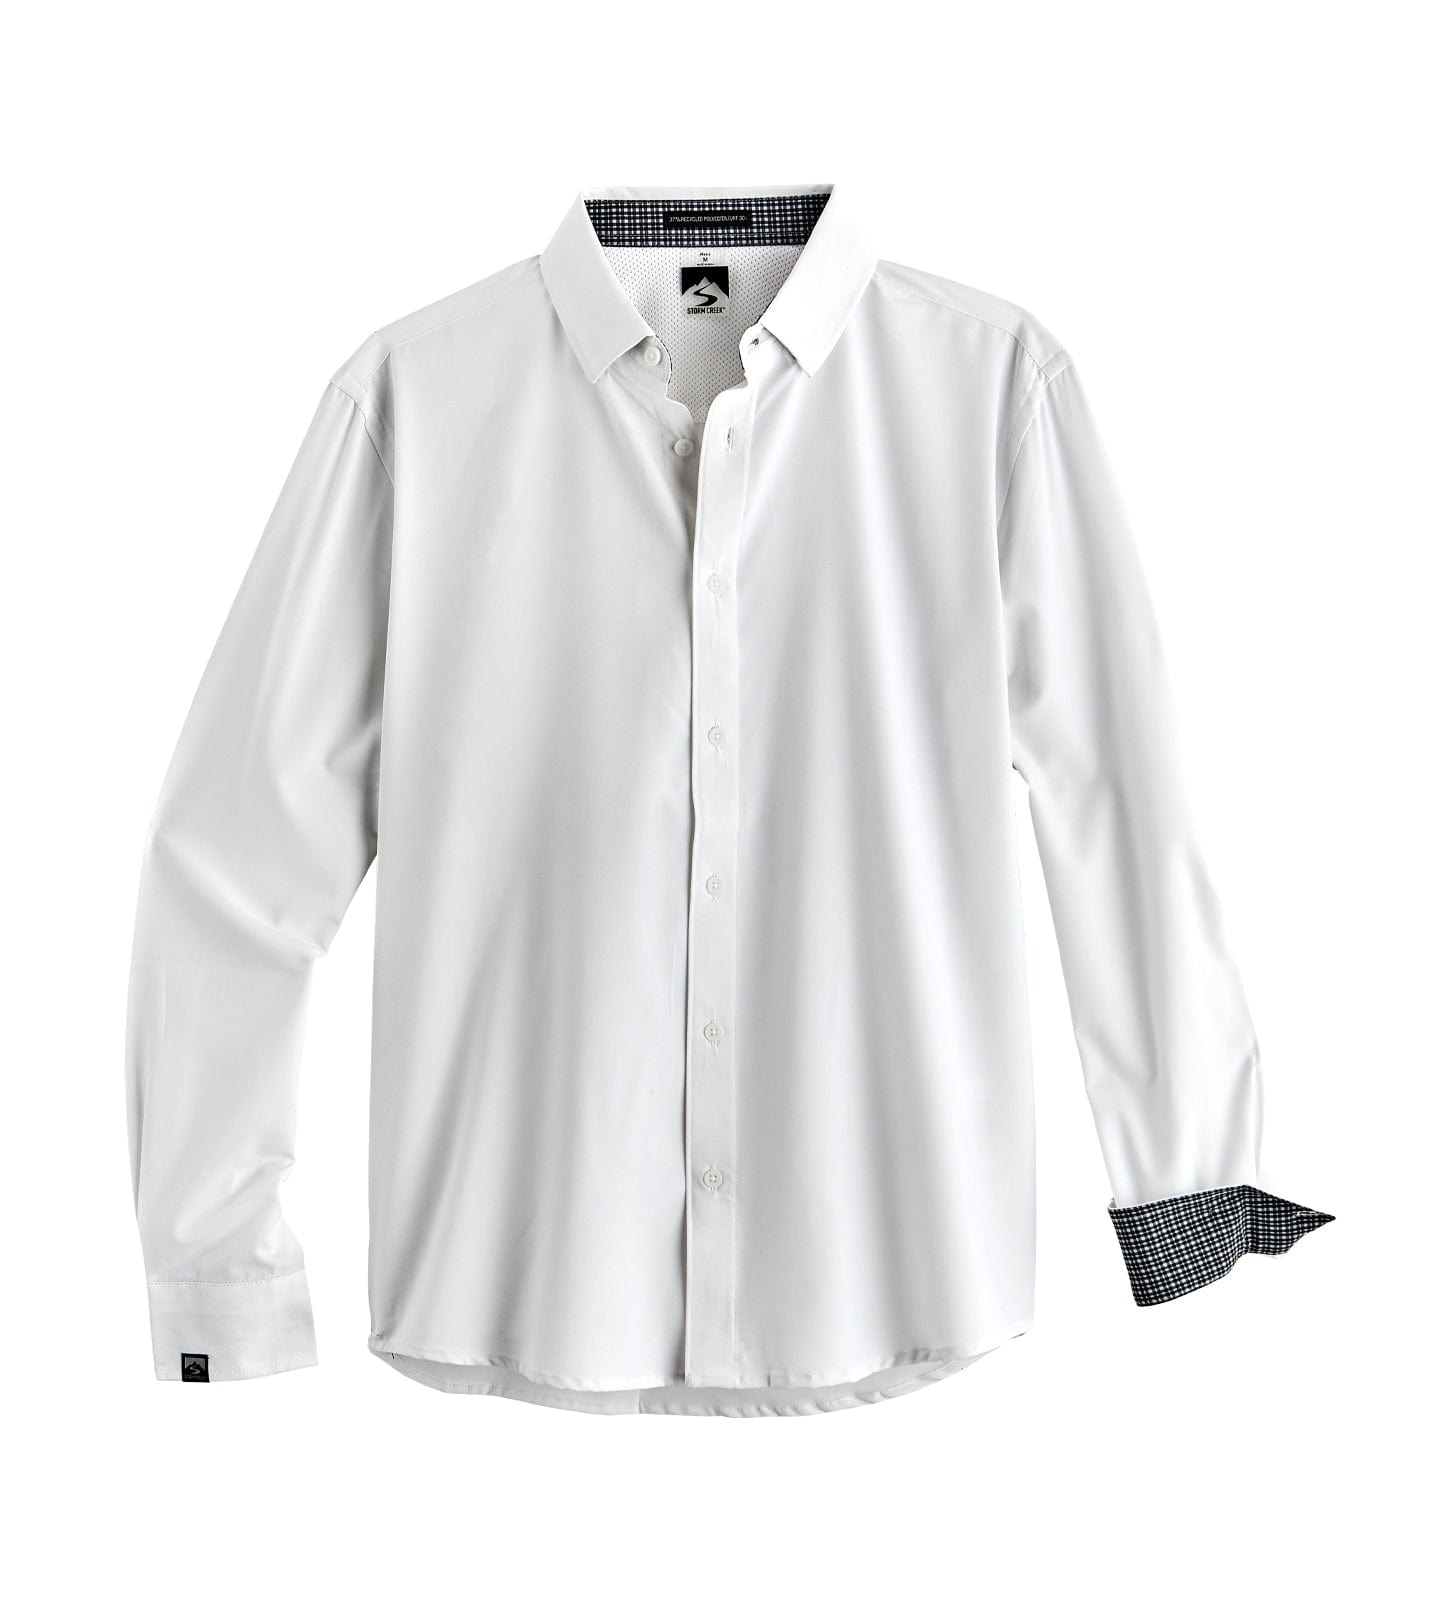 AKPA White Long Sleeve Button up Shirt,Compression Undershirt